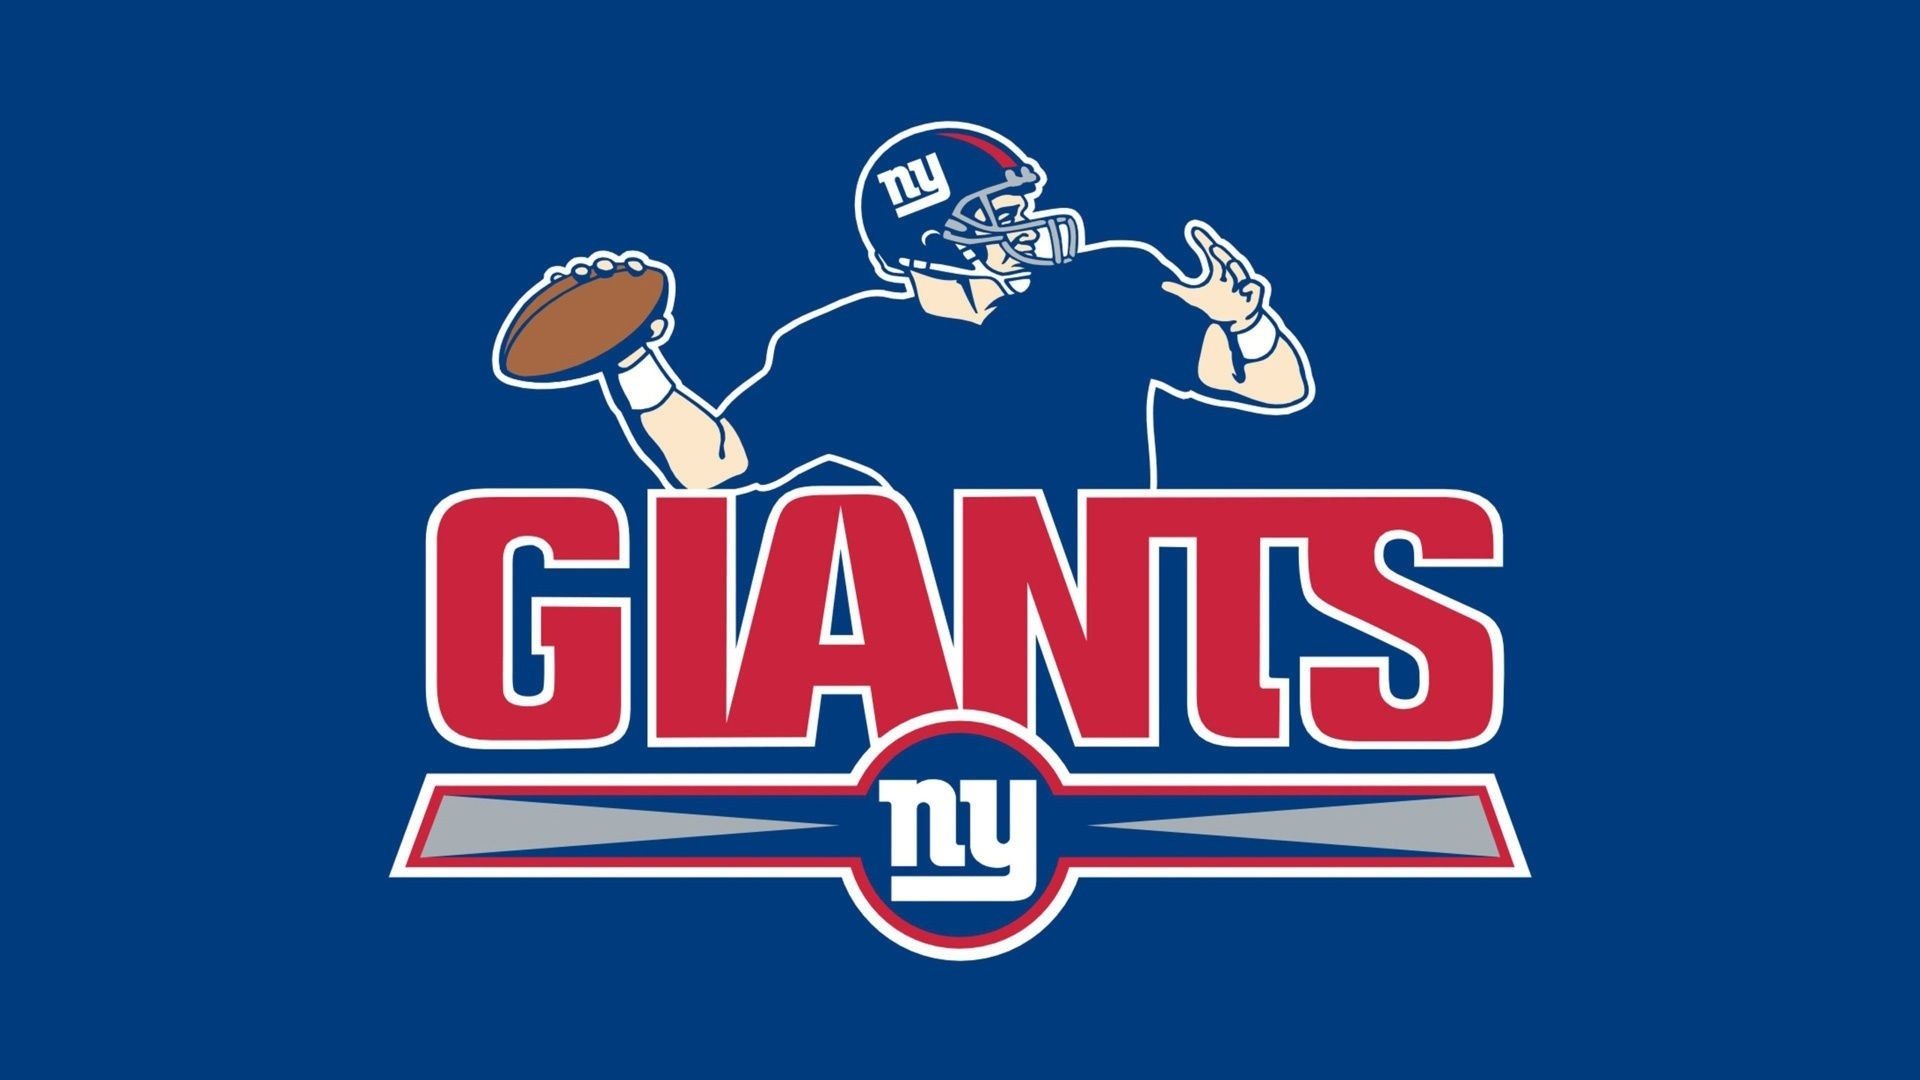 New York Giants: One of the league’s eight original teams, along with the Steelers, Eagles, Redskins, Lions, Packers, Bears and Cardinals. 1920x1080 Full HD Wallpaper.